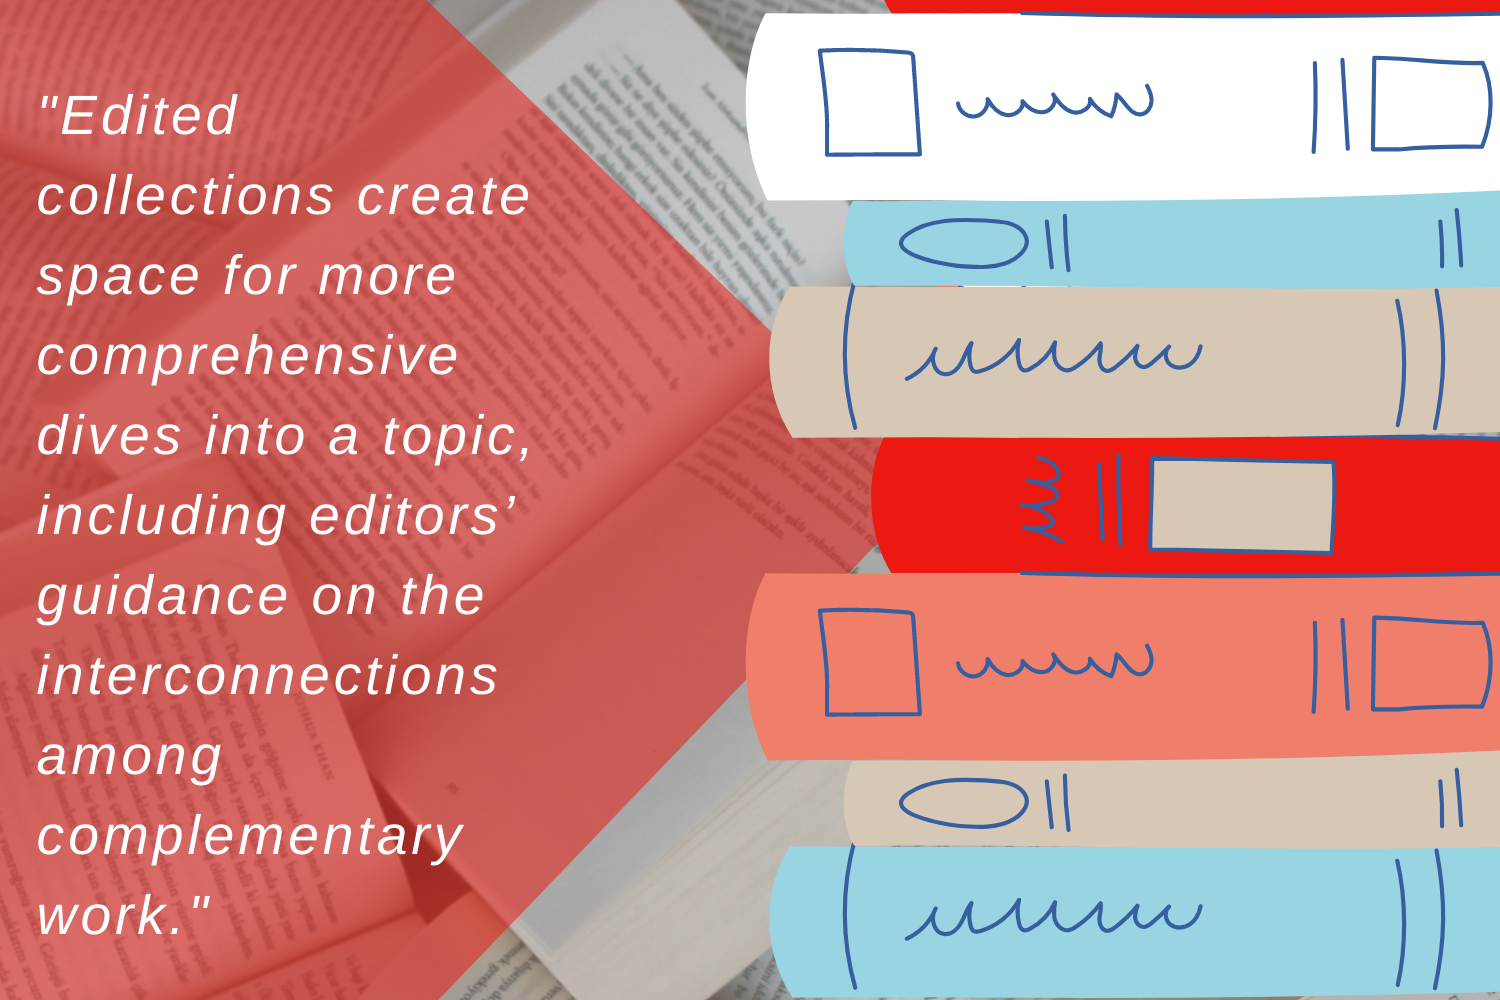 edited collections create space for more comprehensive dives into a topic, including editors’ guidance on the interconnections among complementary work